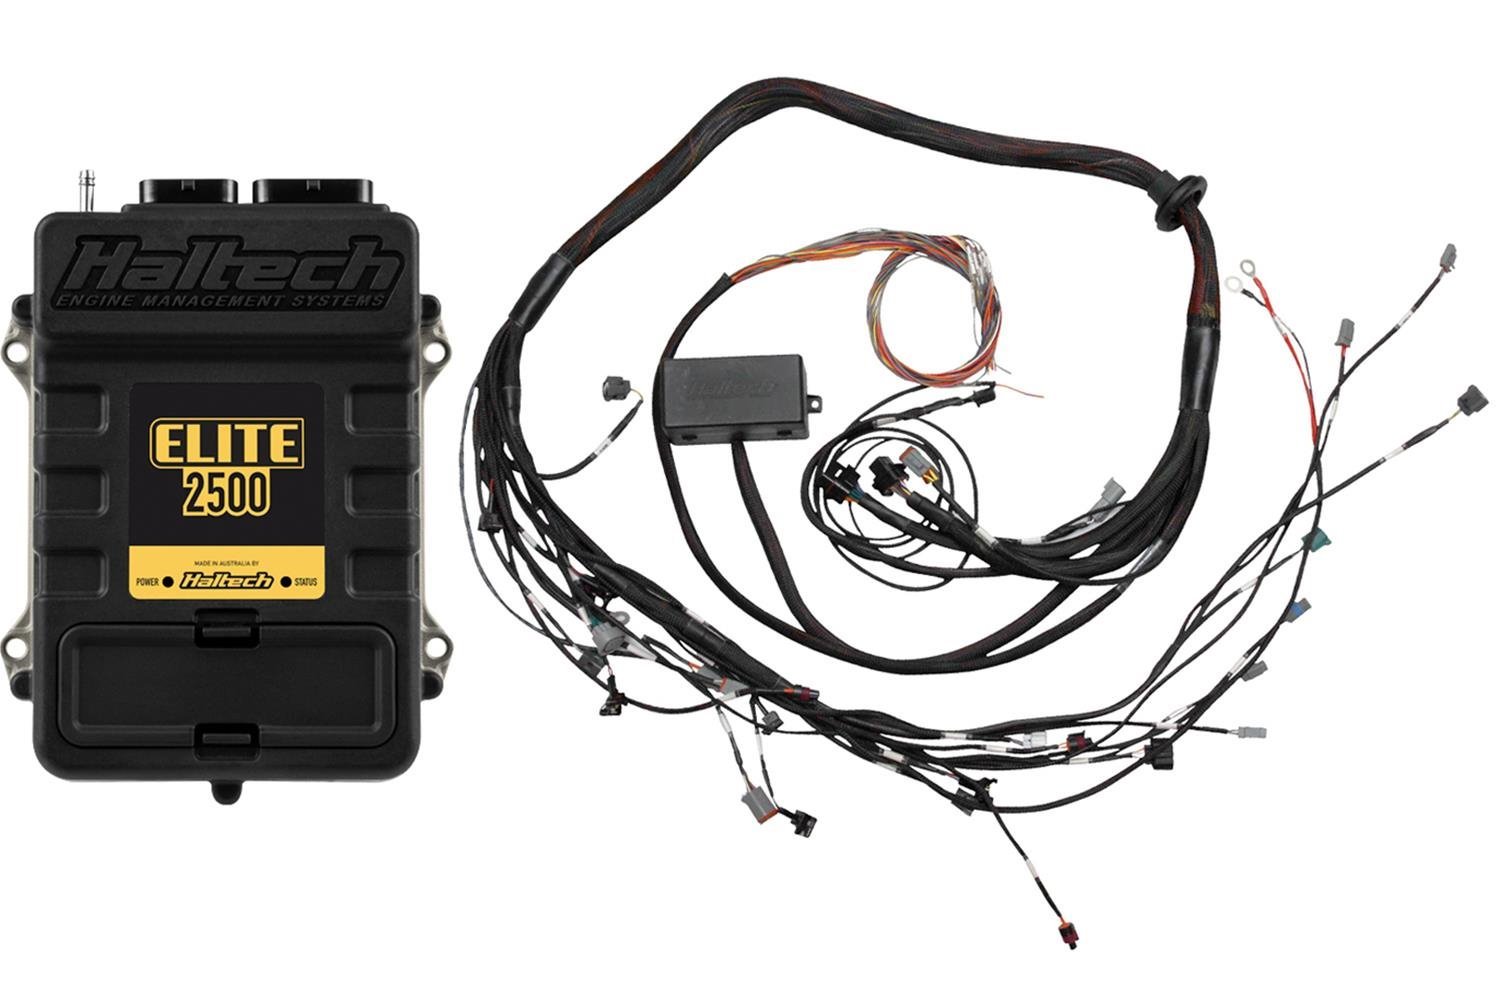 HT-151353 Elite 2500 + Terminated Harness Kit, No Ignition Sub-Harness, Toyota 2JZ